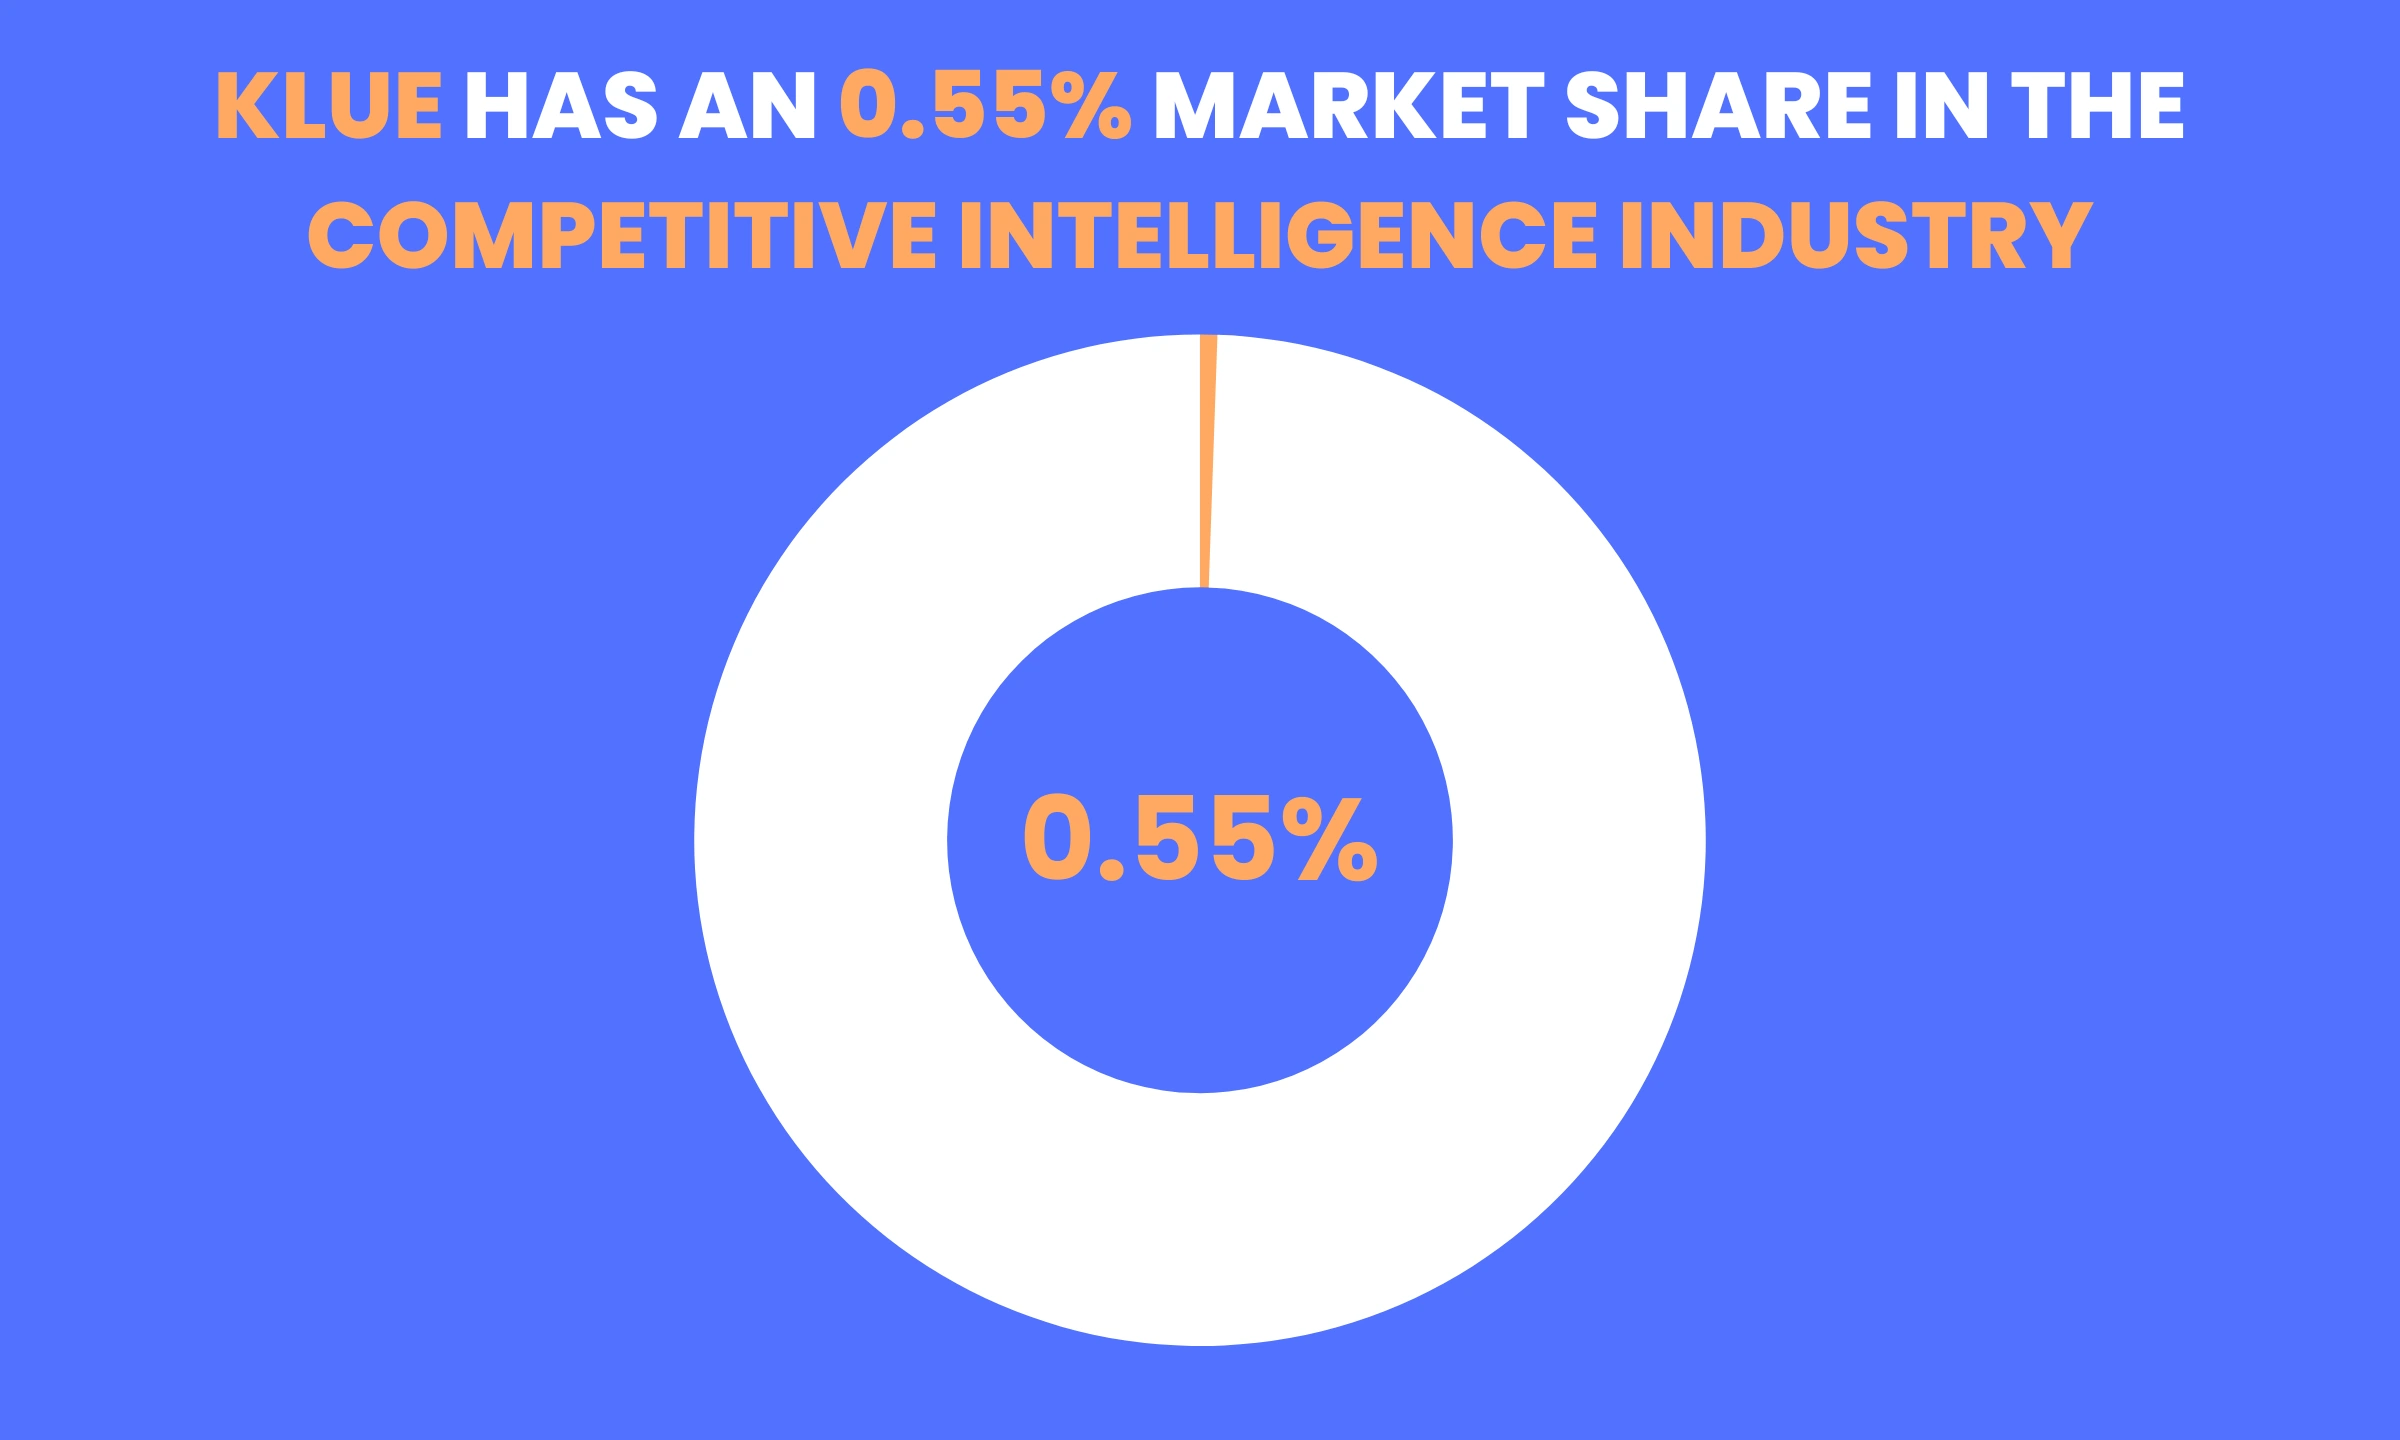 Klue's market share of 0.55% in the competitive intelligence industry